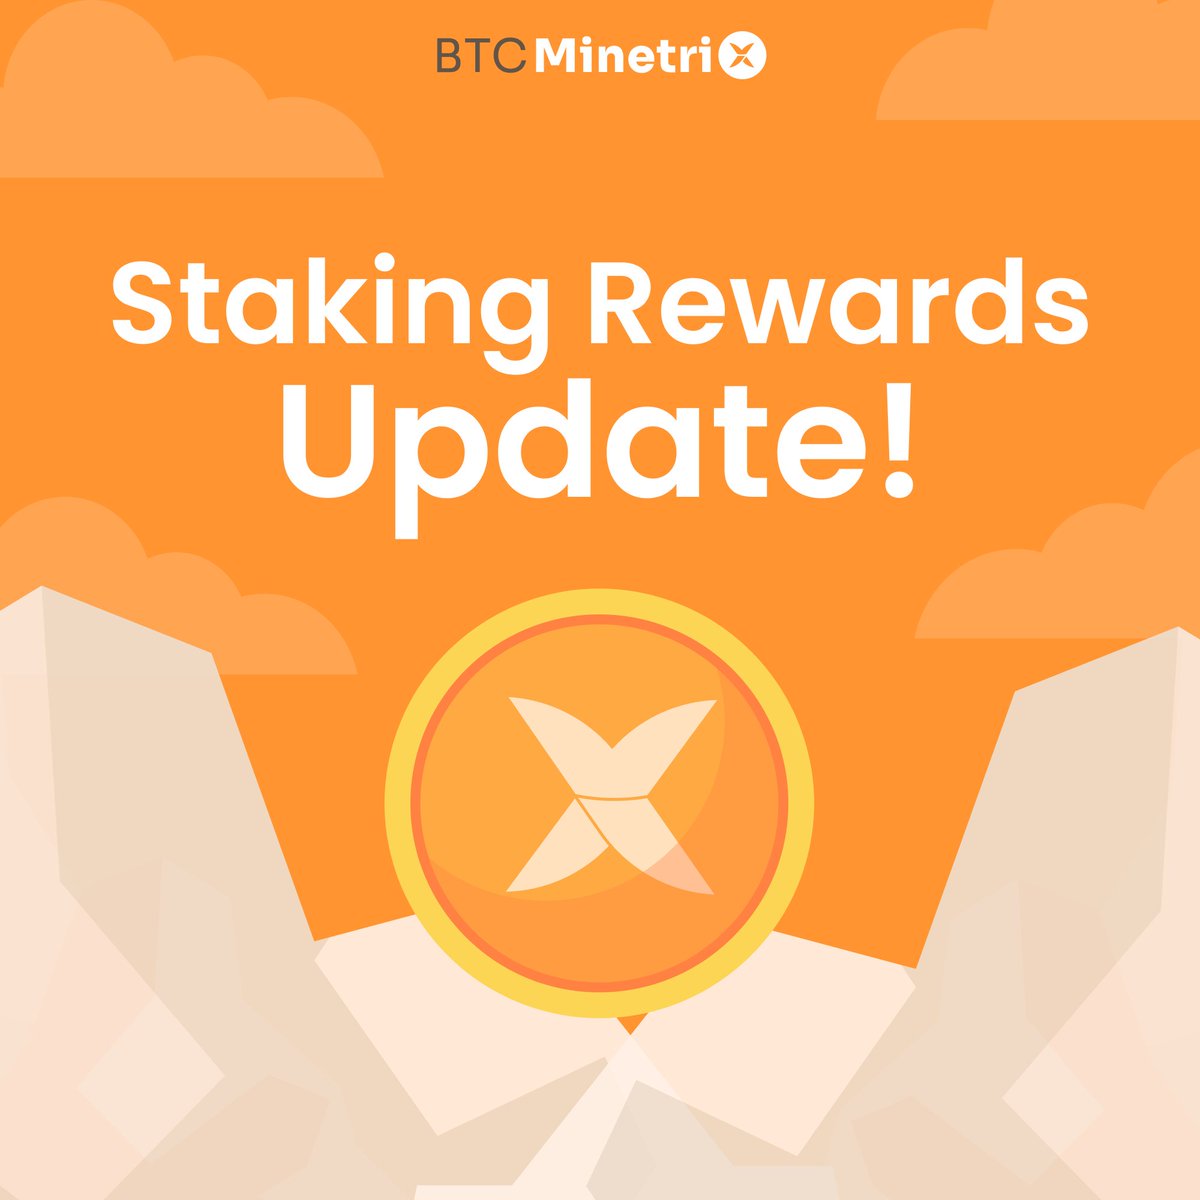 #BTCMTX Staking Rewards Update! 🔒 For users who bought #Tokens and staked in our Staking Contract - these $BTCMTX can now be claimed. Staking rewards are claimable alongside the initial token claim. Make sure to claim them through the 'Stake to Mine' dashboard on our website,…